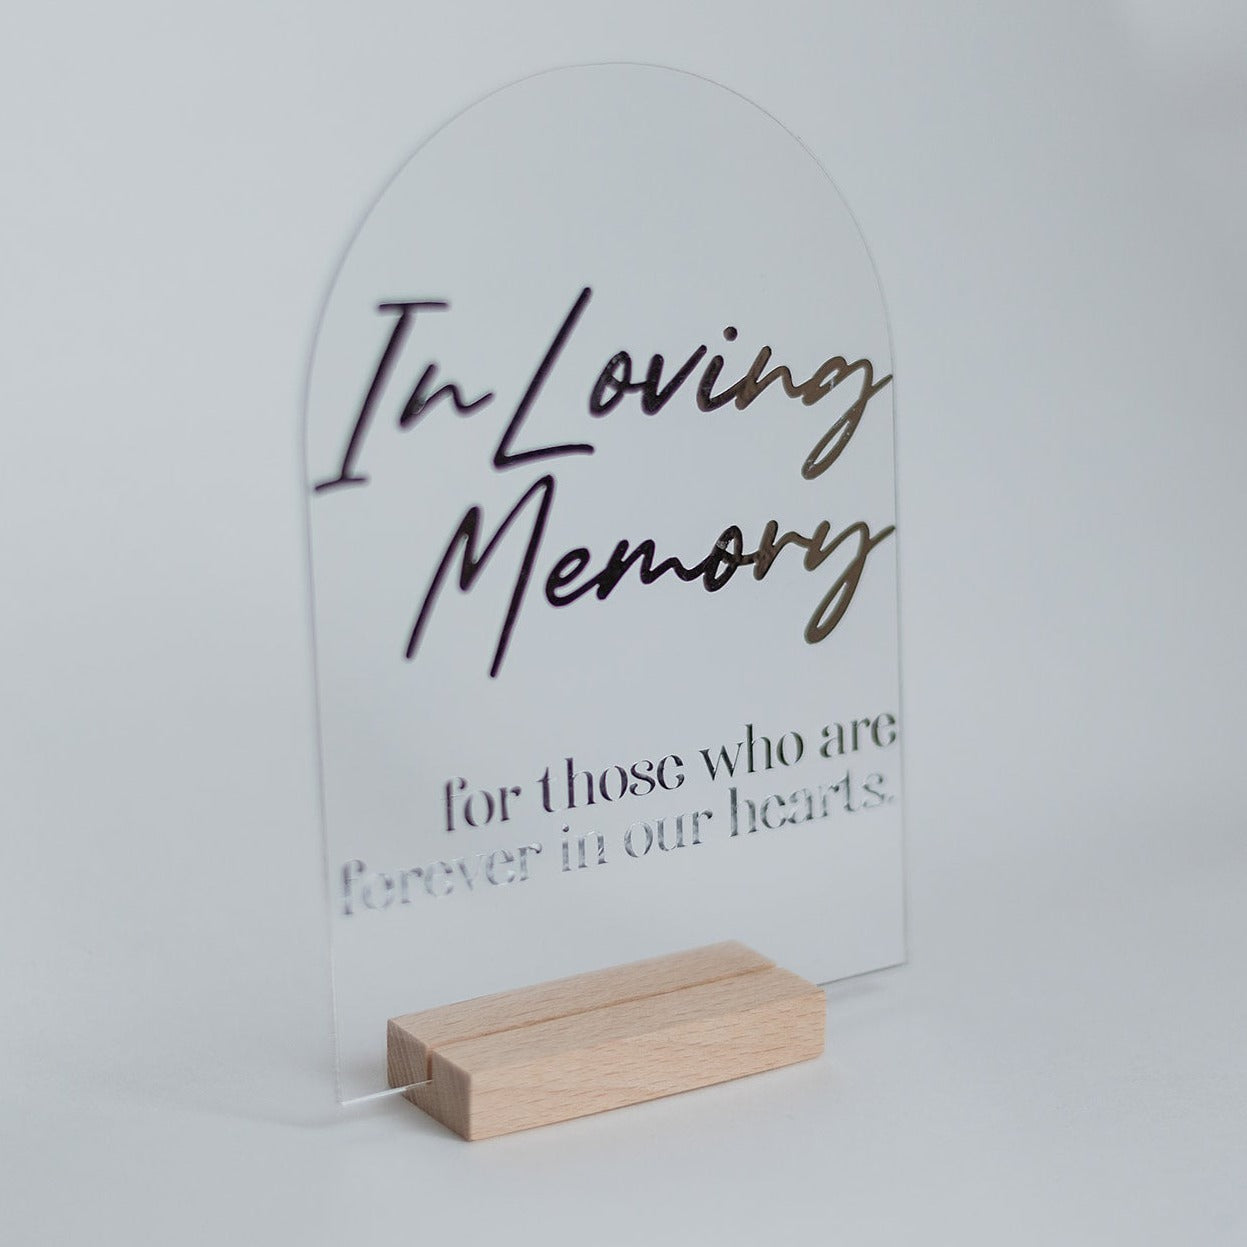 A clear, arch-shaped acrylic memorial sign with silver text on a light wooden base.